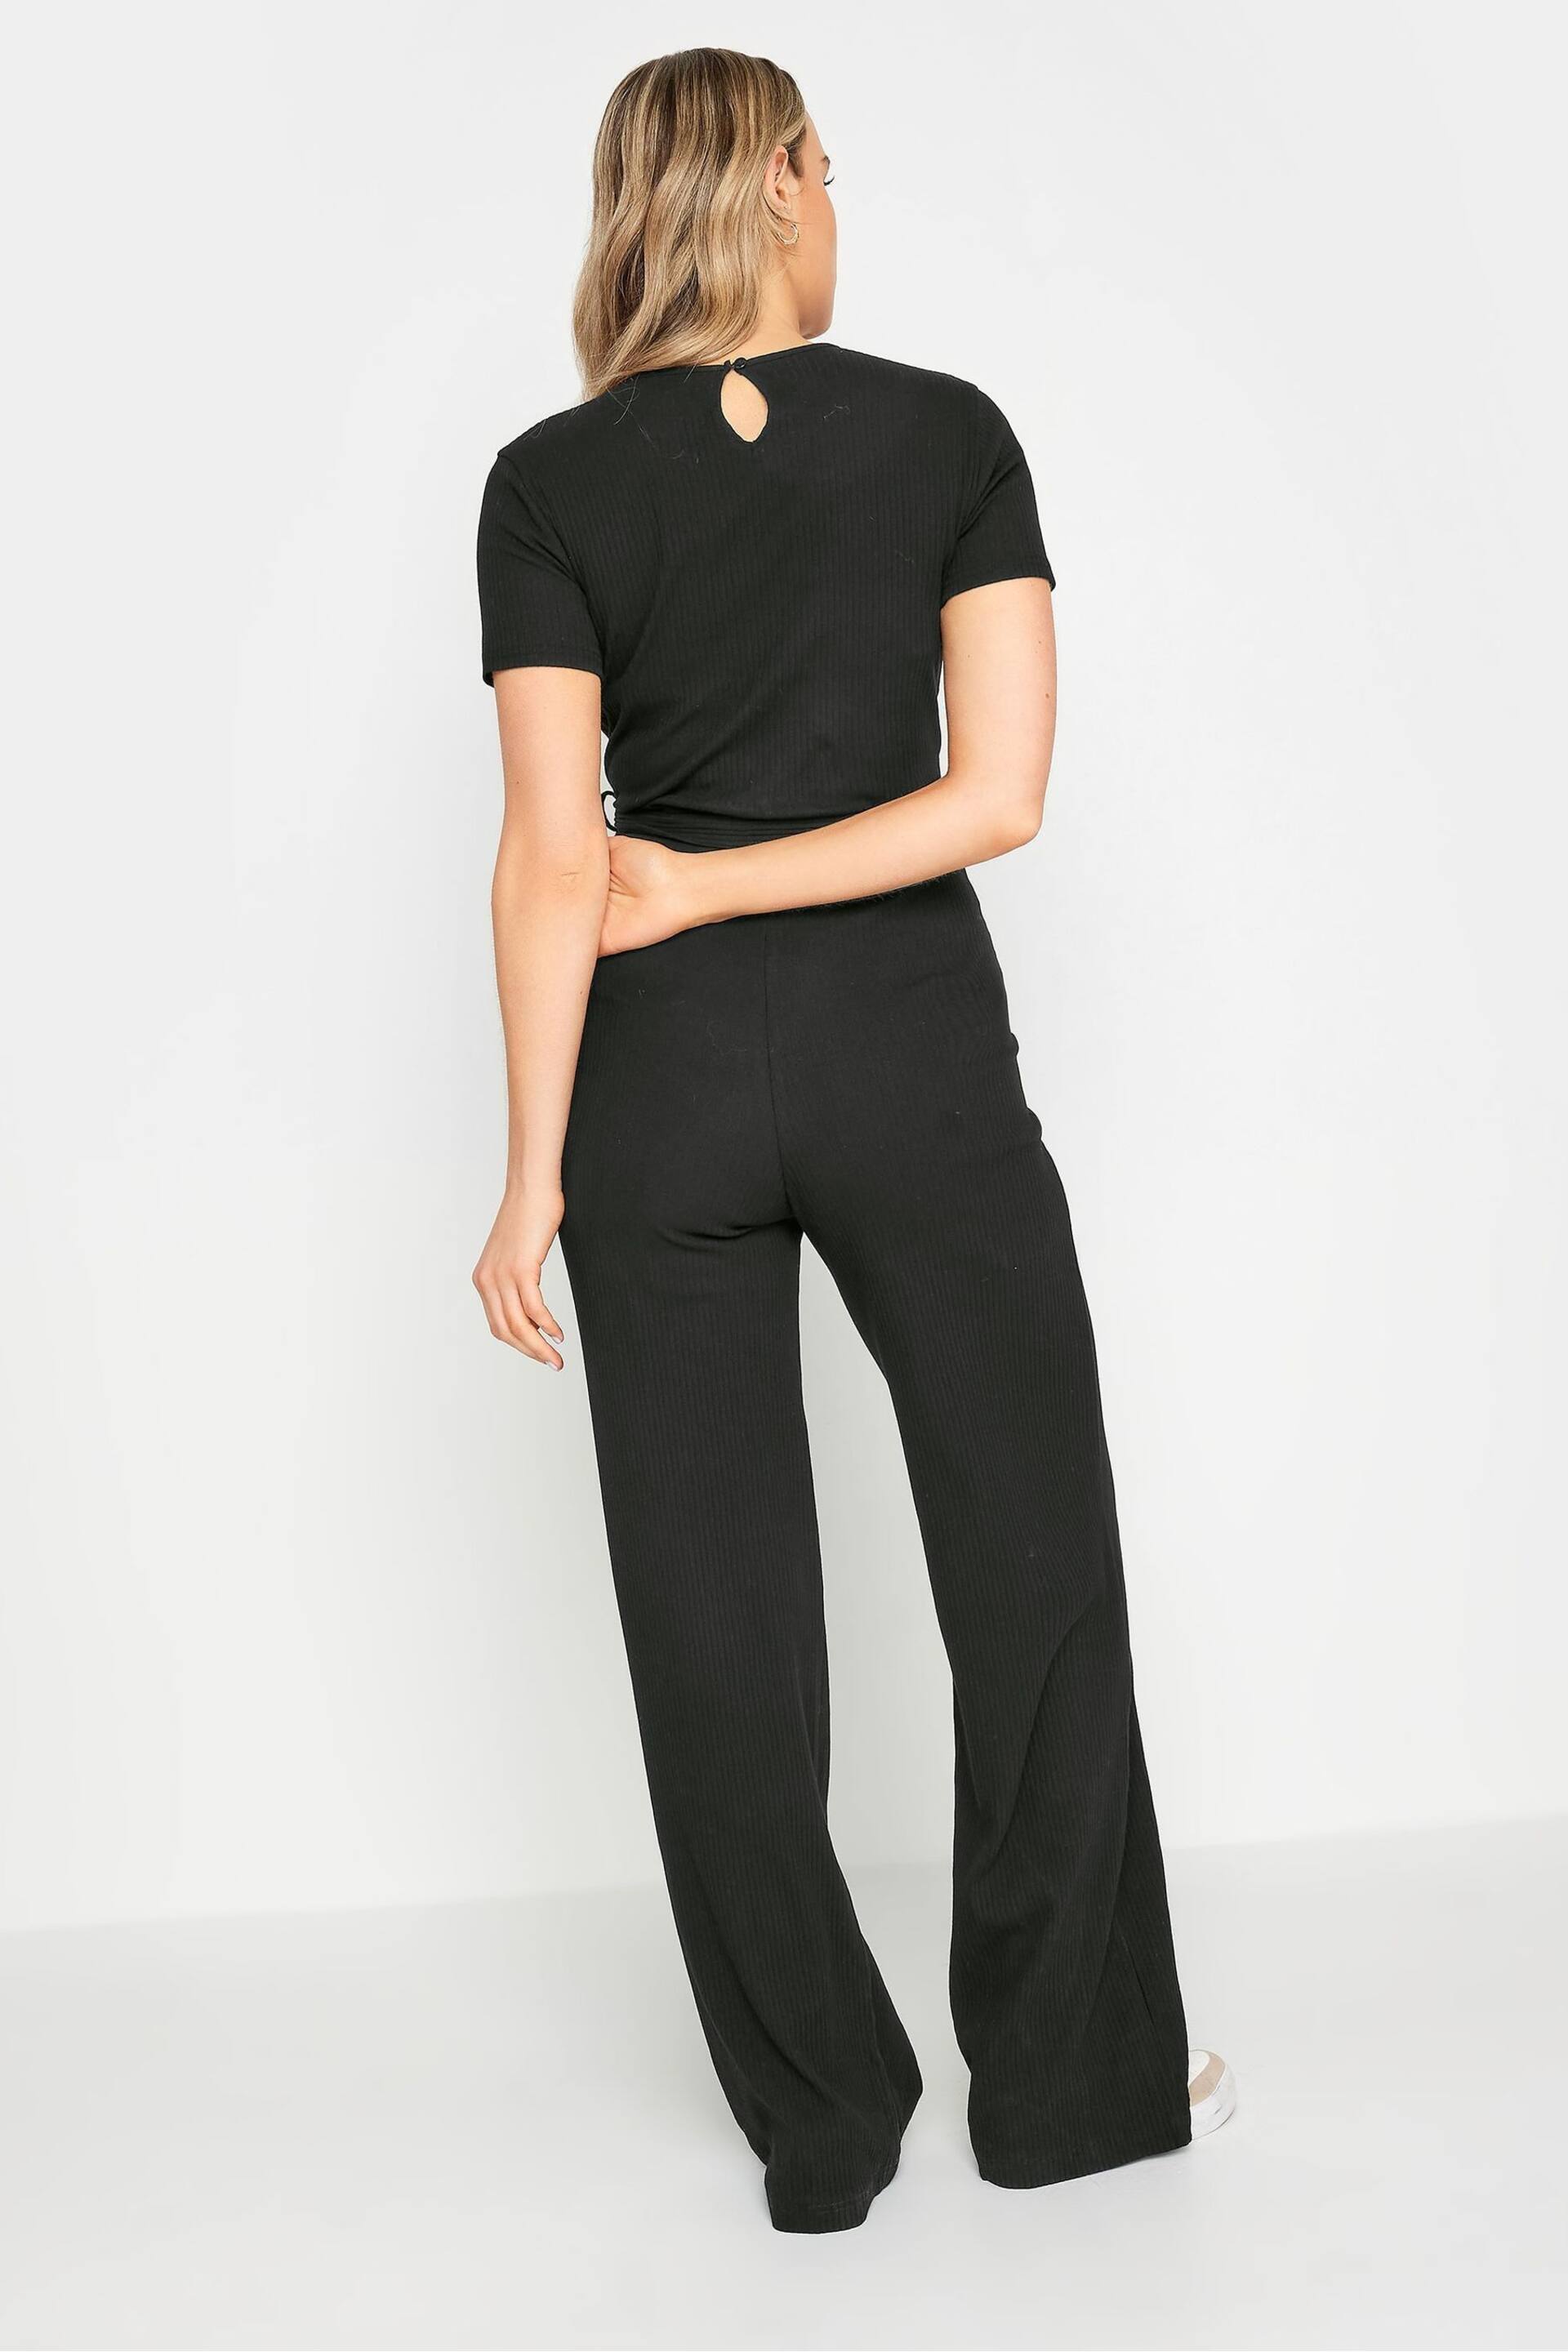 Long Tall Sally Black Maternity Ribbed Jumpsuit - Image 2 of 5